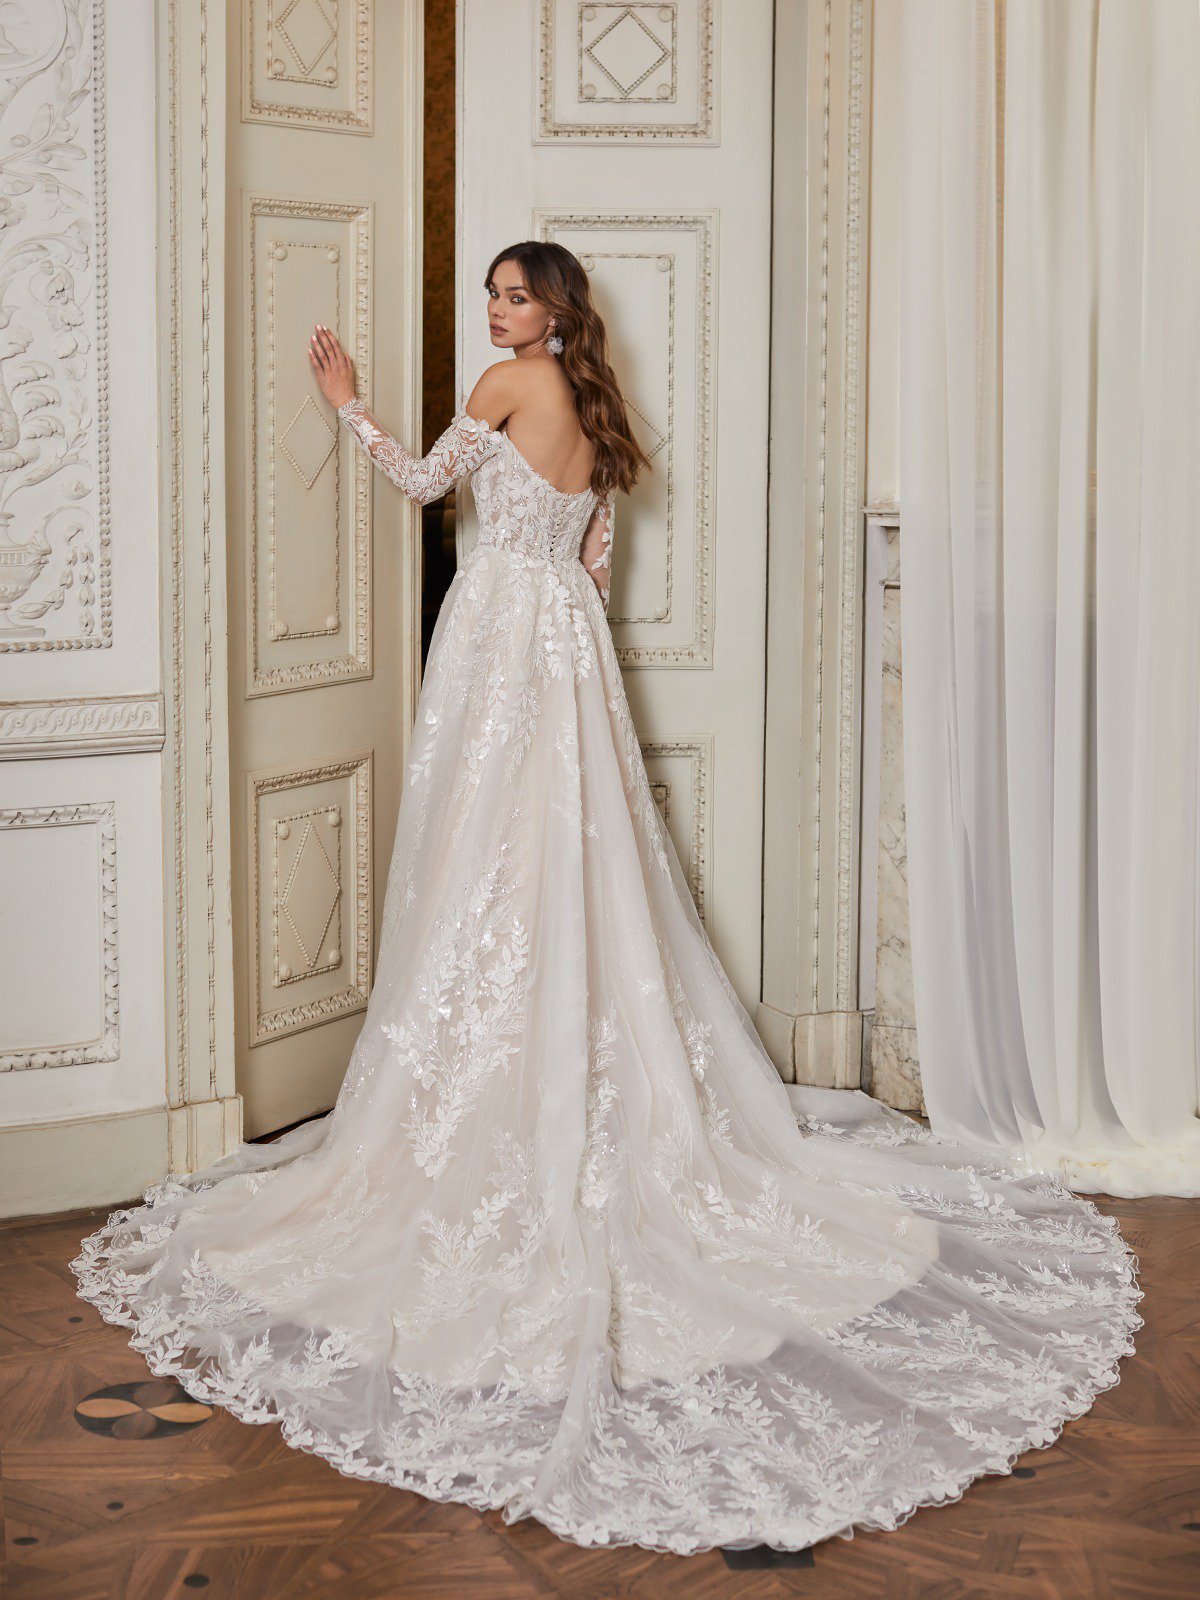 Luxury Sweetheart Corset Back Wedding Dress With Swarovski Crystal Ball Gown,  Lace Applique, Court Train, Tulle, And Diamond Bling From Crown2014,  $683.42